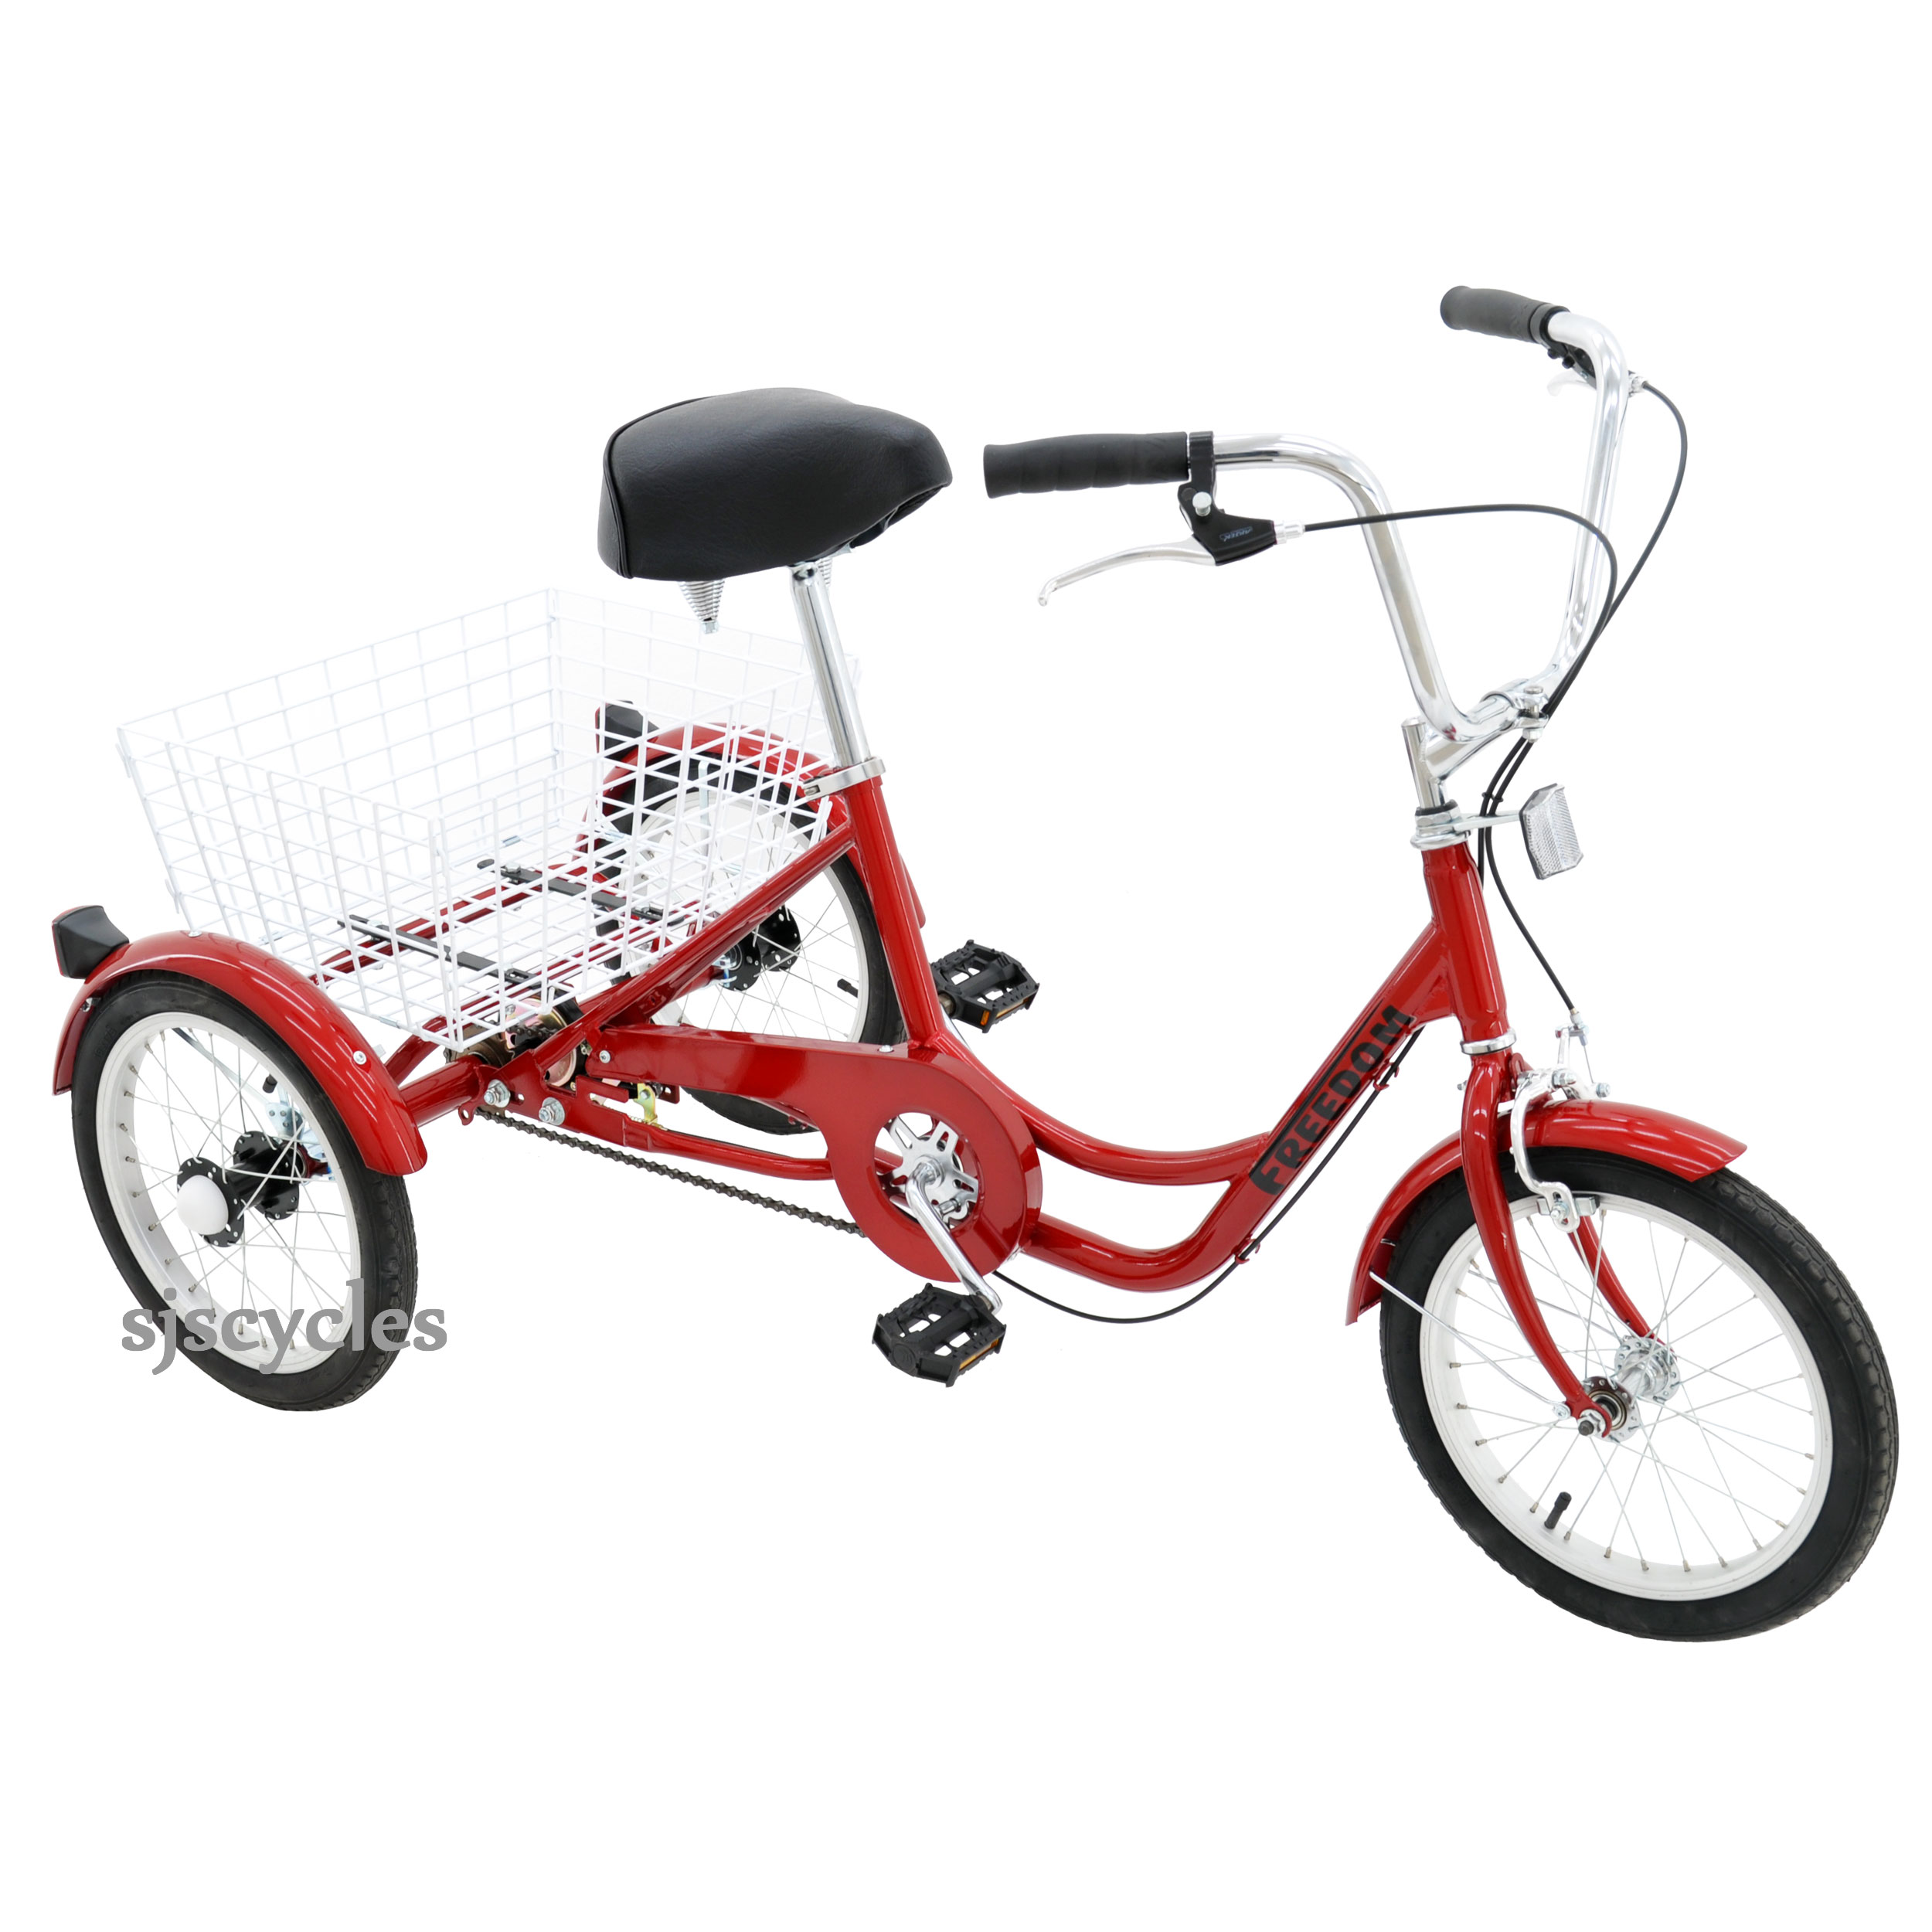 Adult Size Tricycle 87